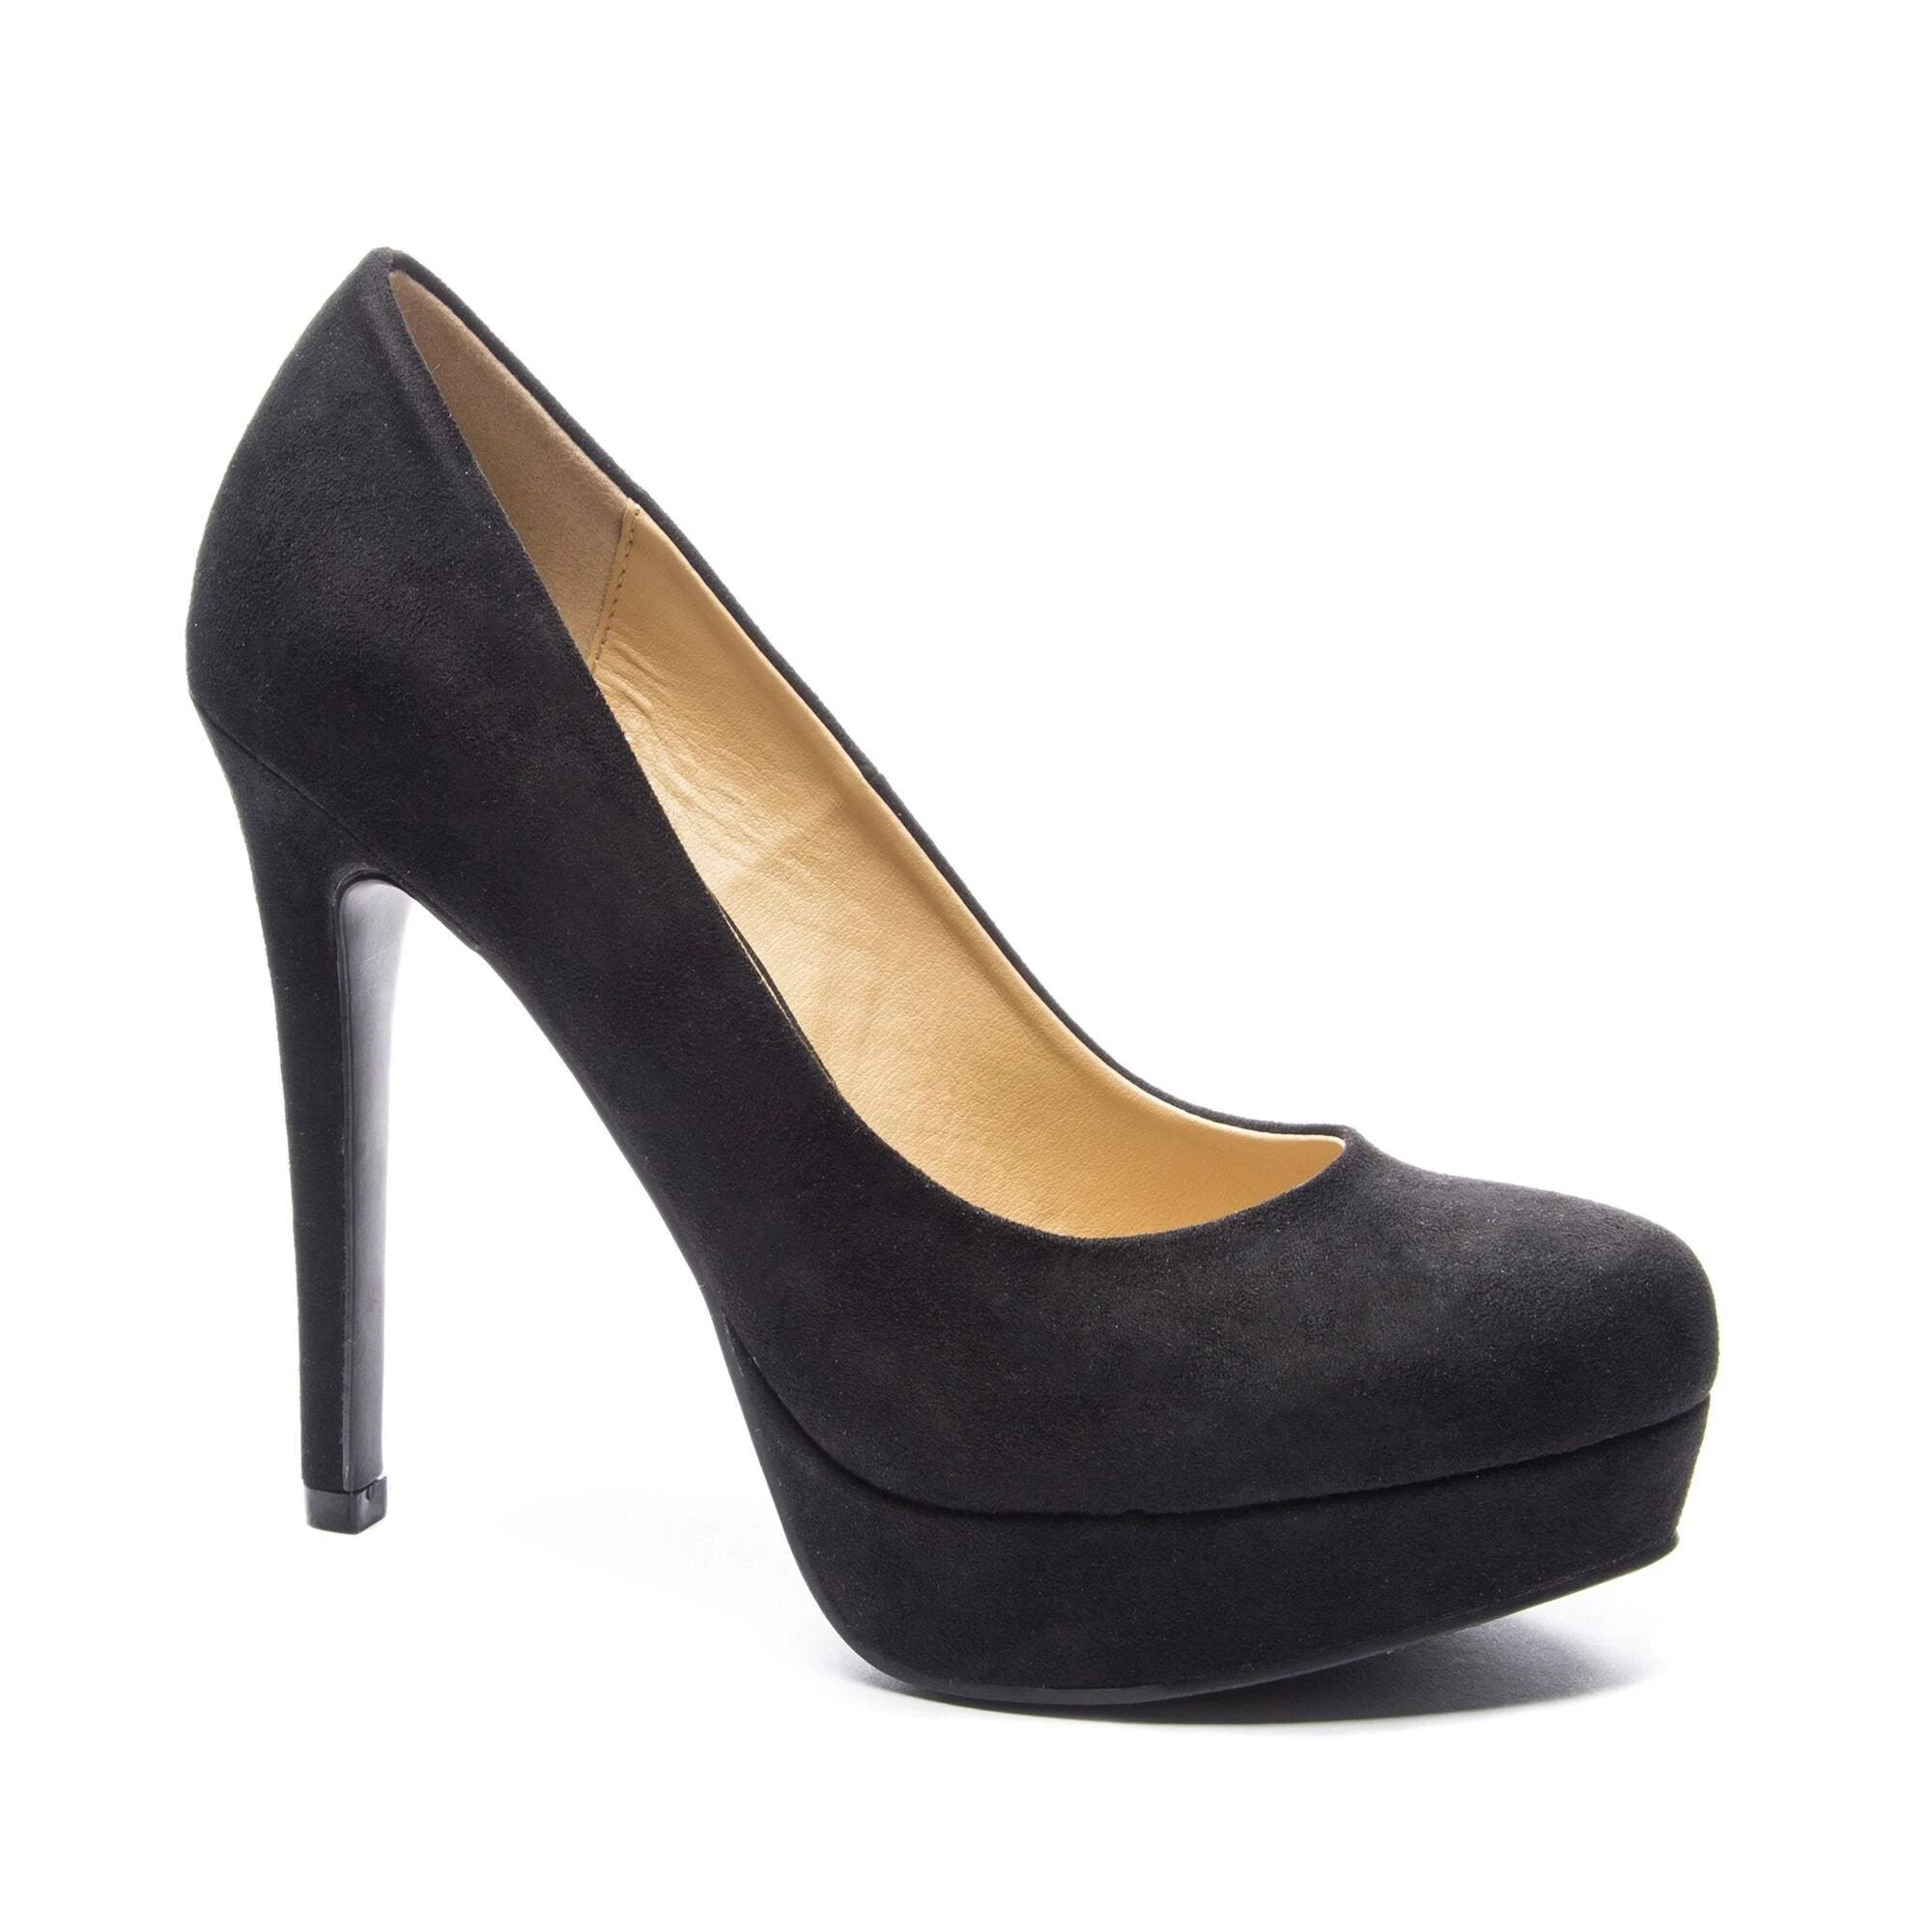 Chinese Laundry Wow Platform Pumps: Stand Tall & Sparkle with a Chic Heel | Image